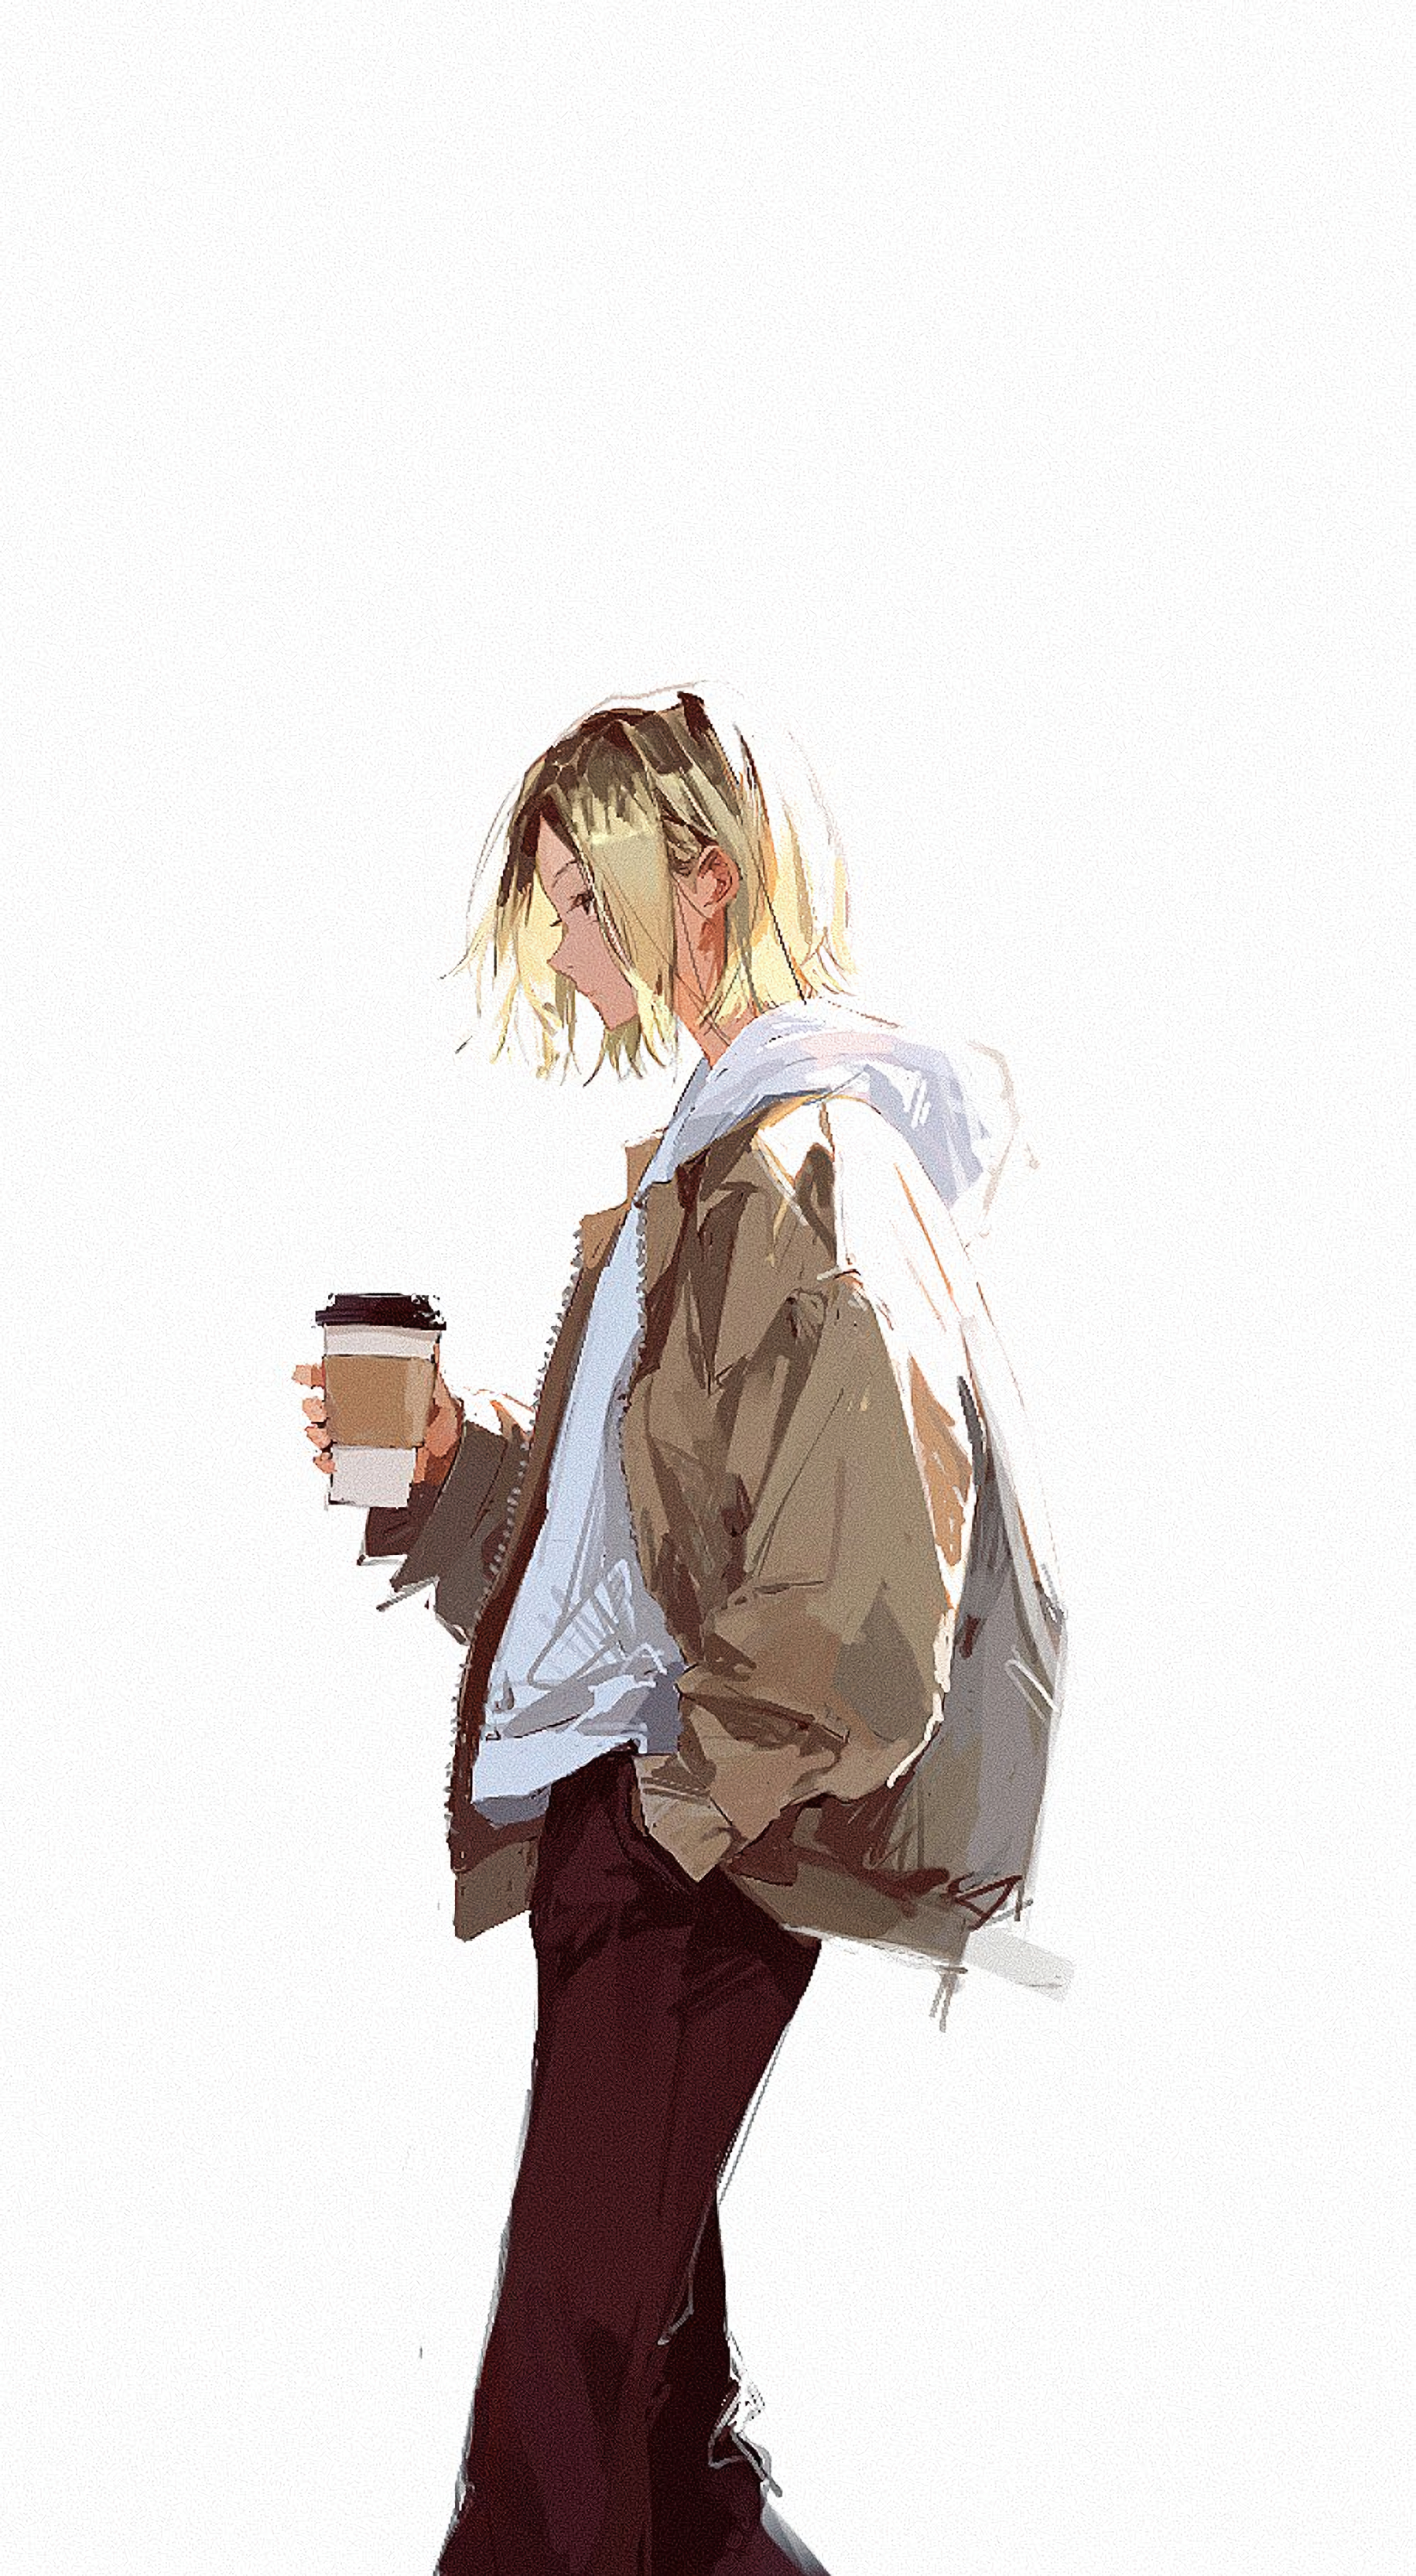 Anime 1830x3330 96yottea anime boys simple background anime white background standing Haikyuu!! Kozume Kenma portrait display jacket open jacket long sleeves hands in pockets drink coffee side view bright short hair blonde